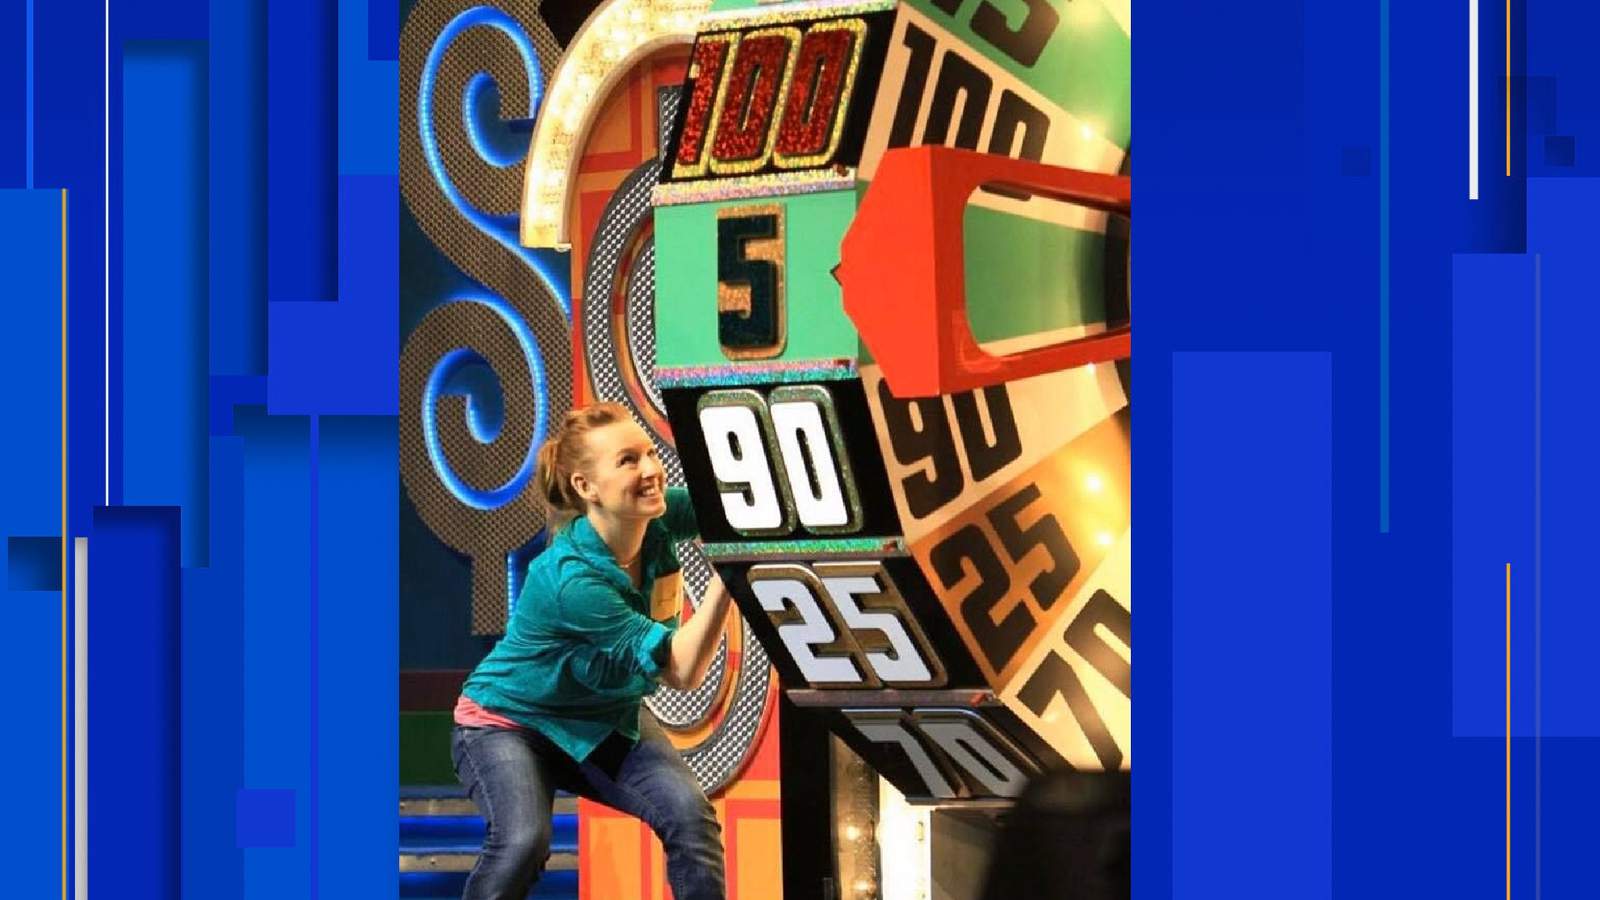 Come on down! Price is Right Live on Stage coming to Tobin Center